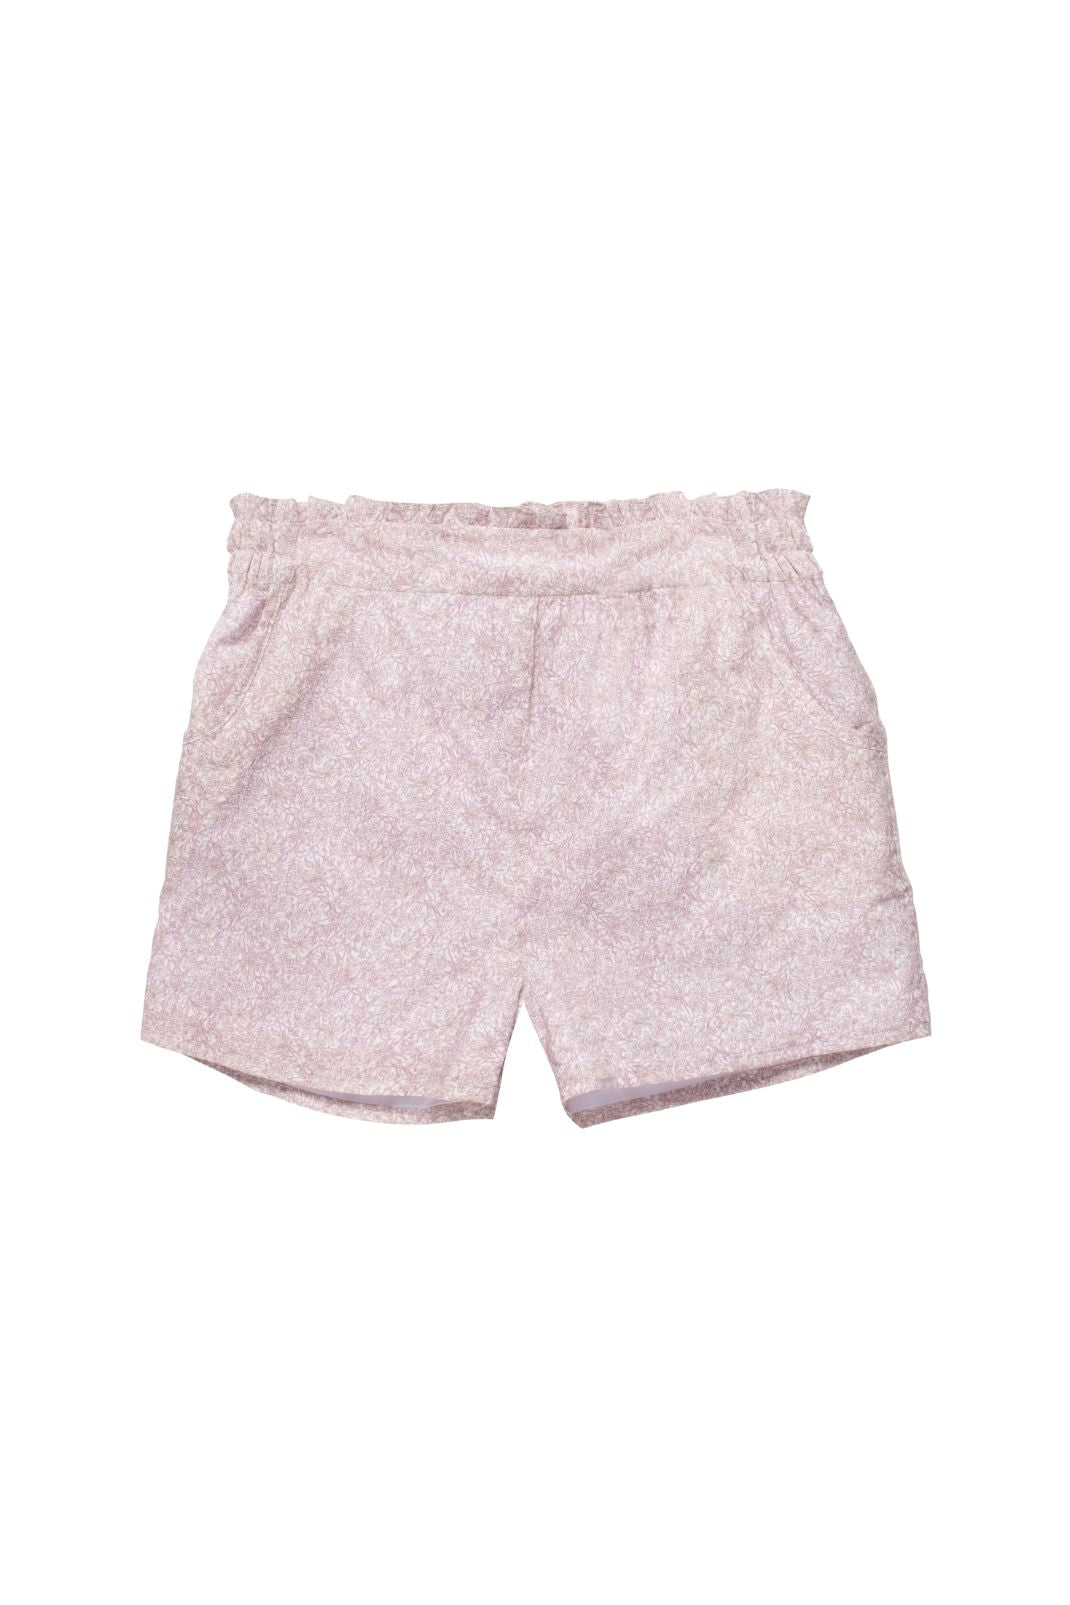 Product shot of the Mae Short in Scattered Blooms